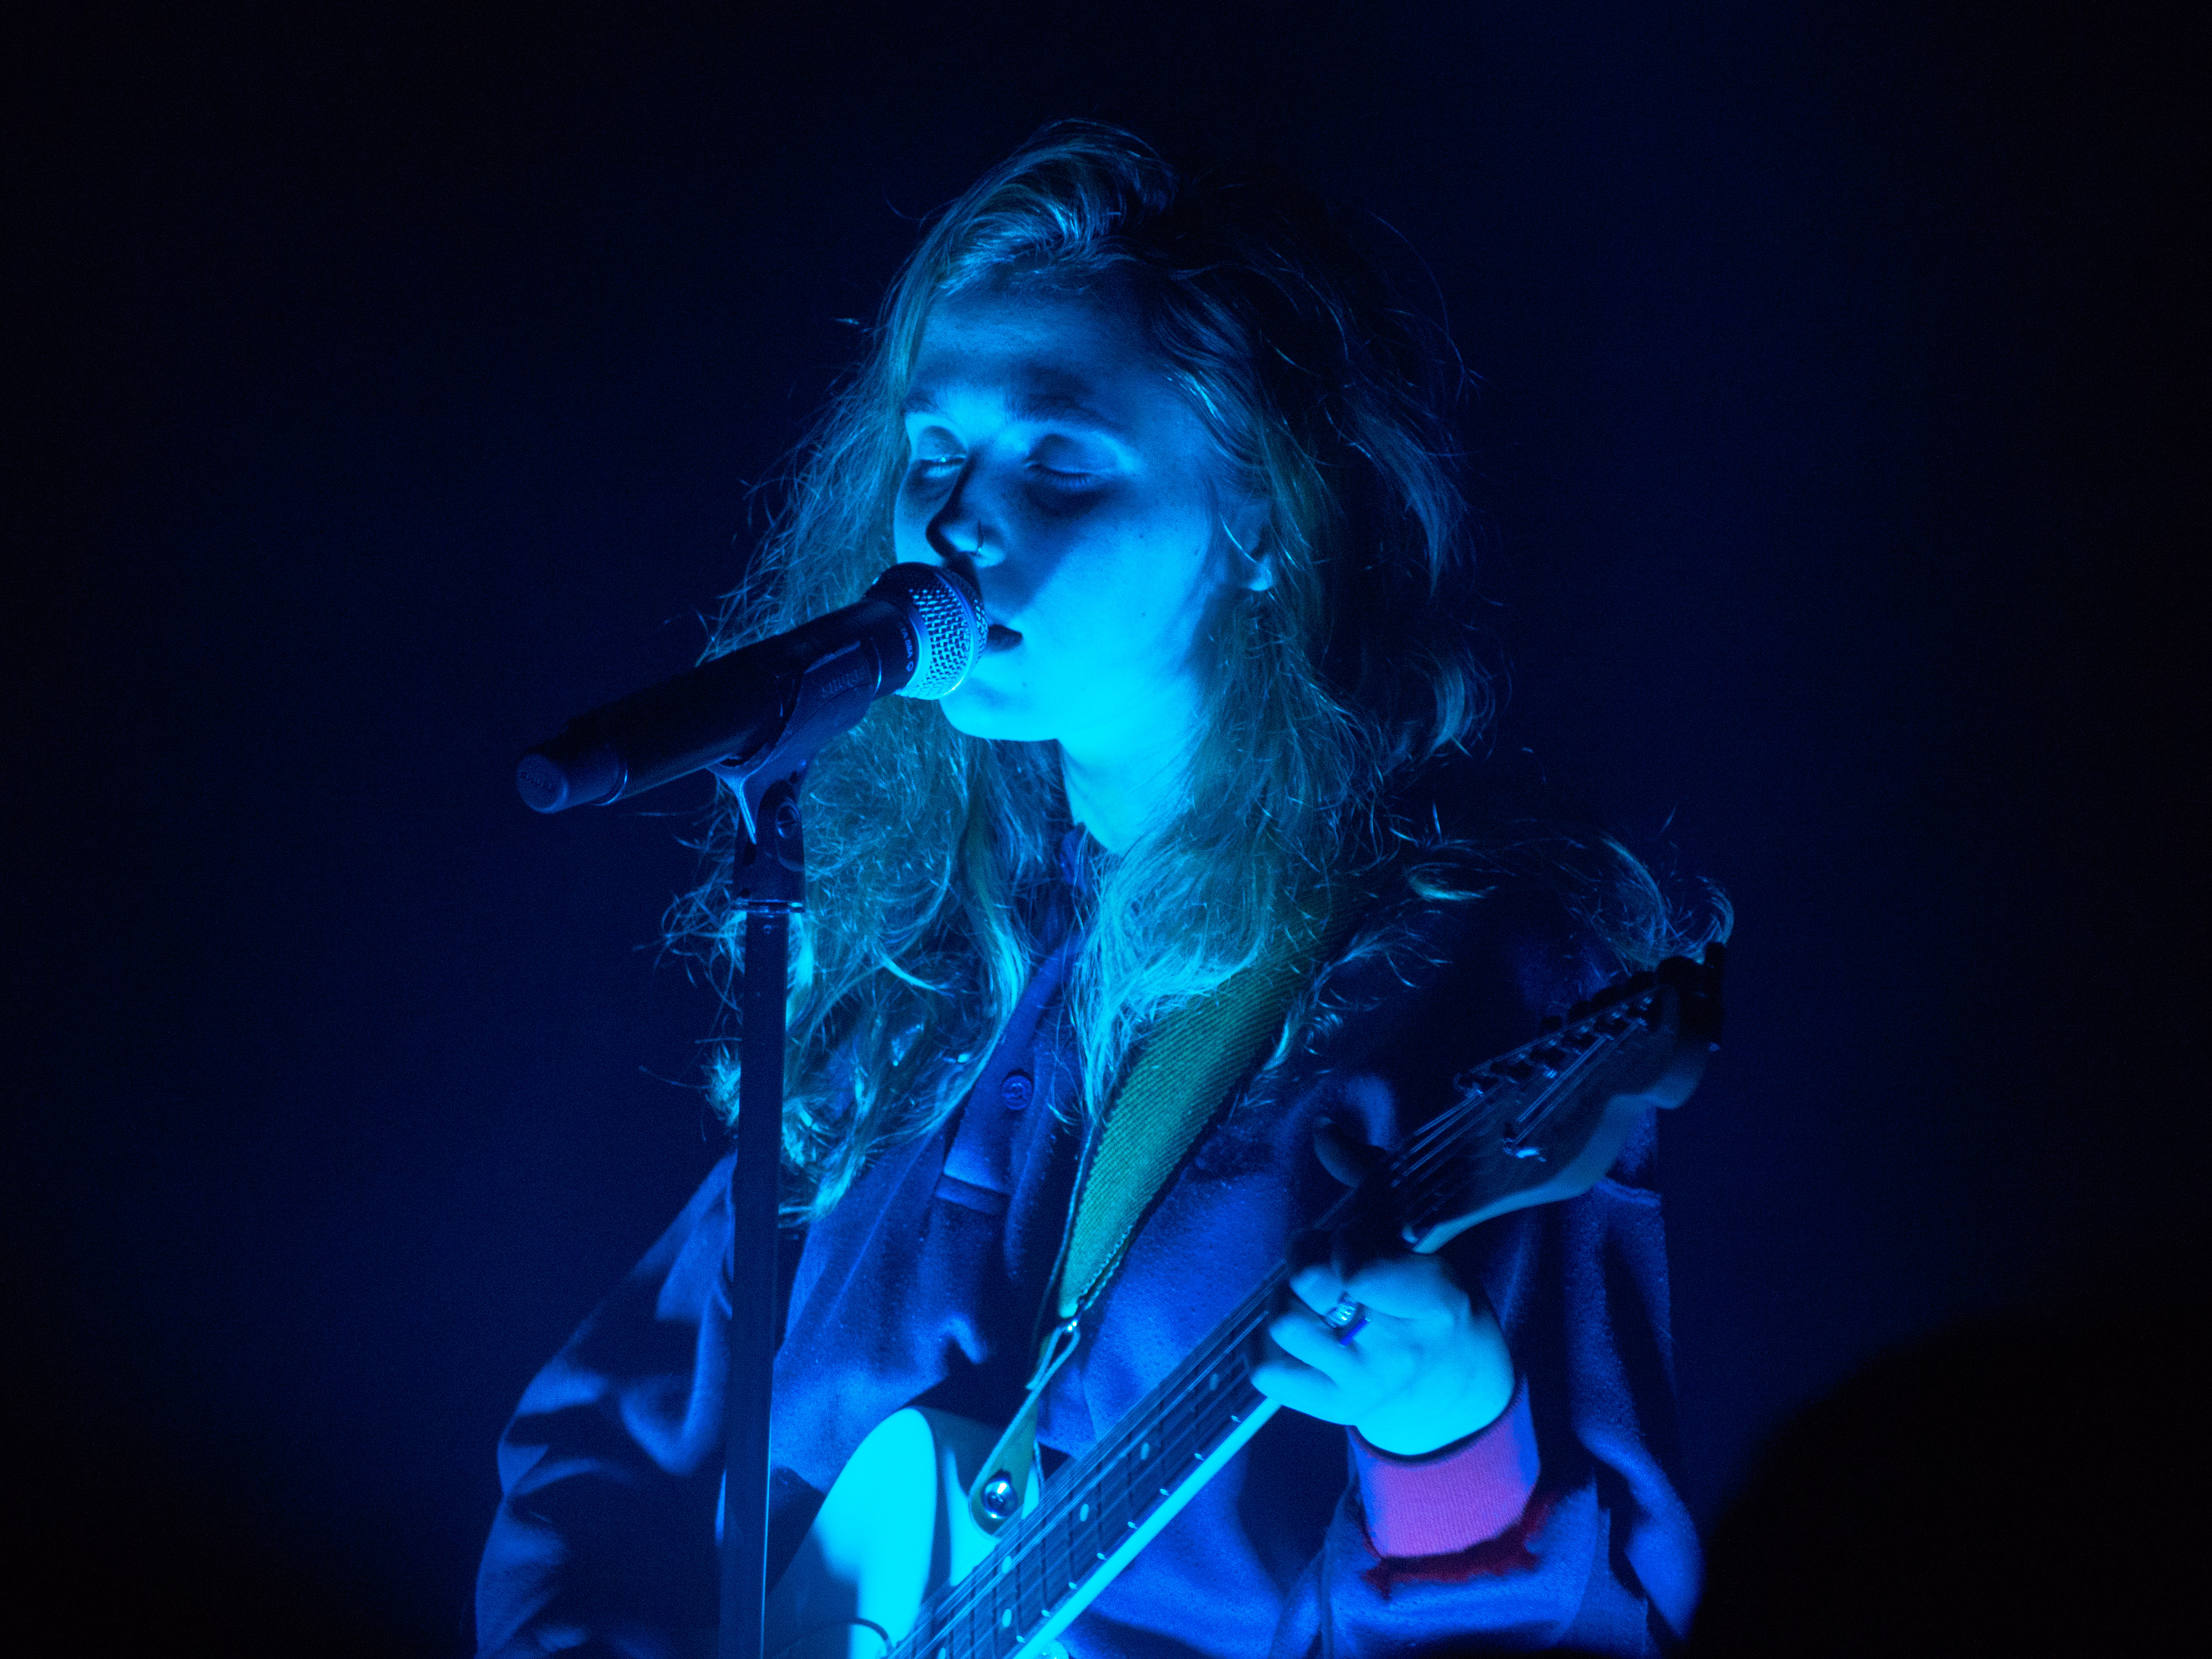 Clairo at House of Blues Cambridge Room on 8/20/18